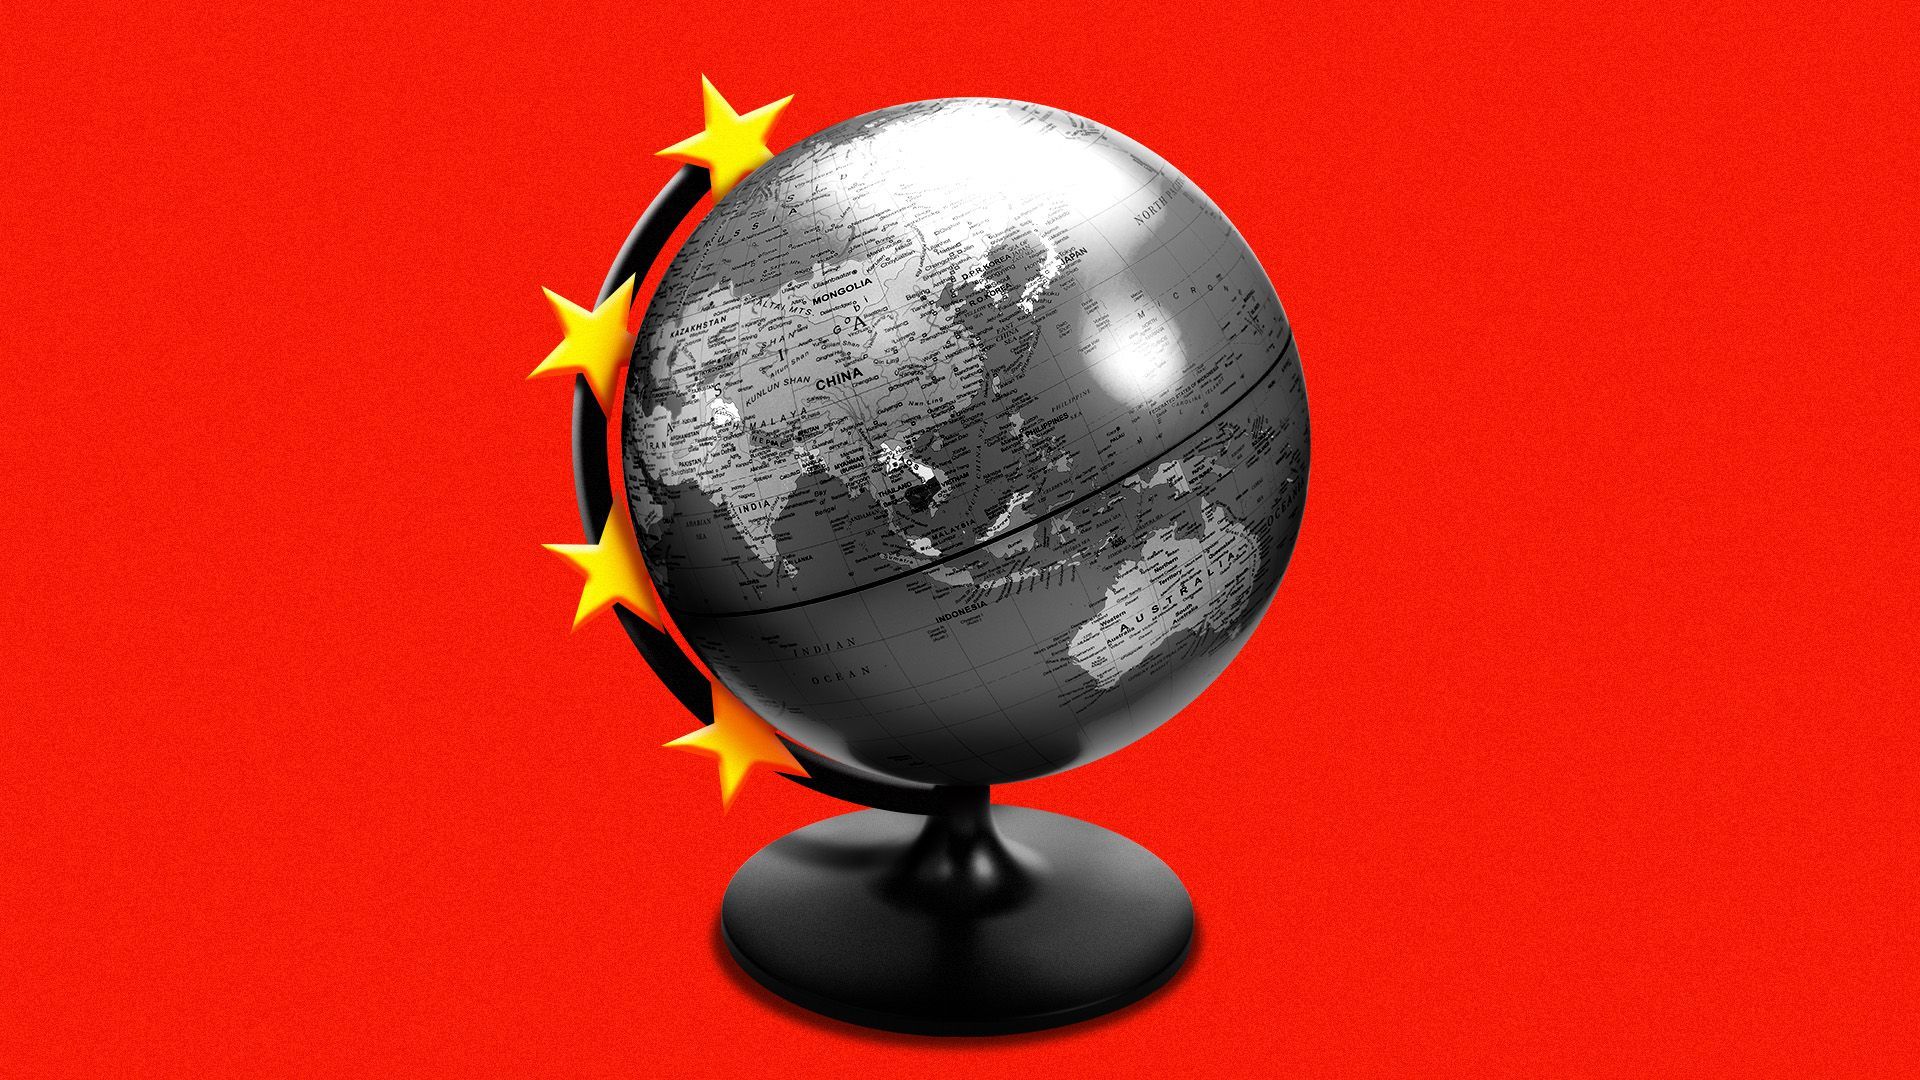 Illustration of a globe showing the Indo-Pacific with a stand made of stars from the  People's Republic of China on a red background